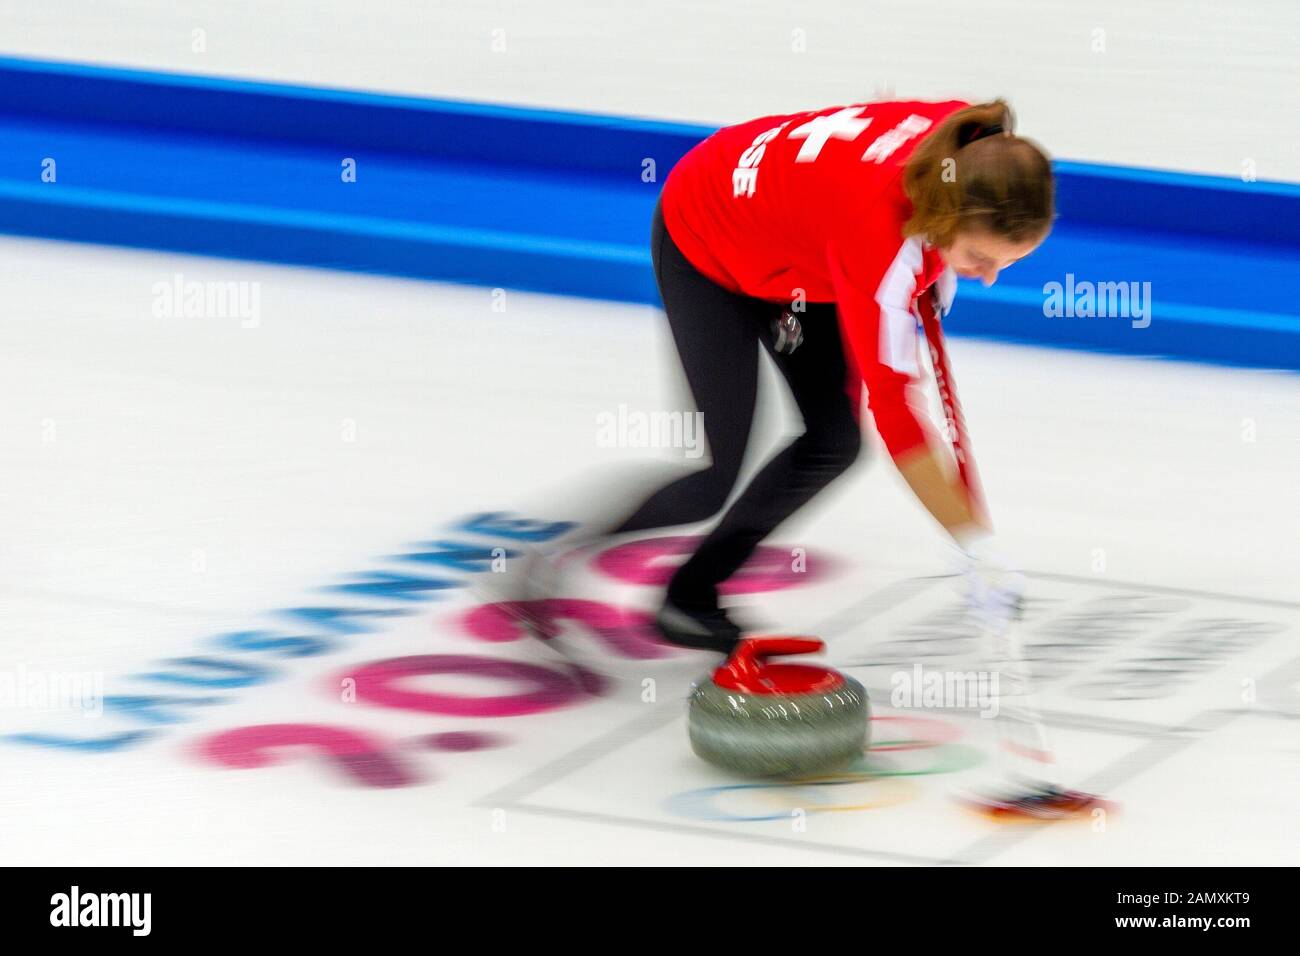 Champery Curling Arena High Resolution Stock Photography and Images - Alamy